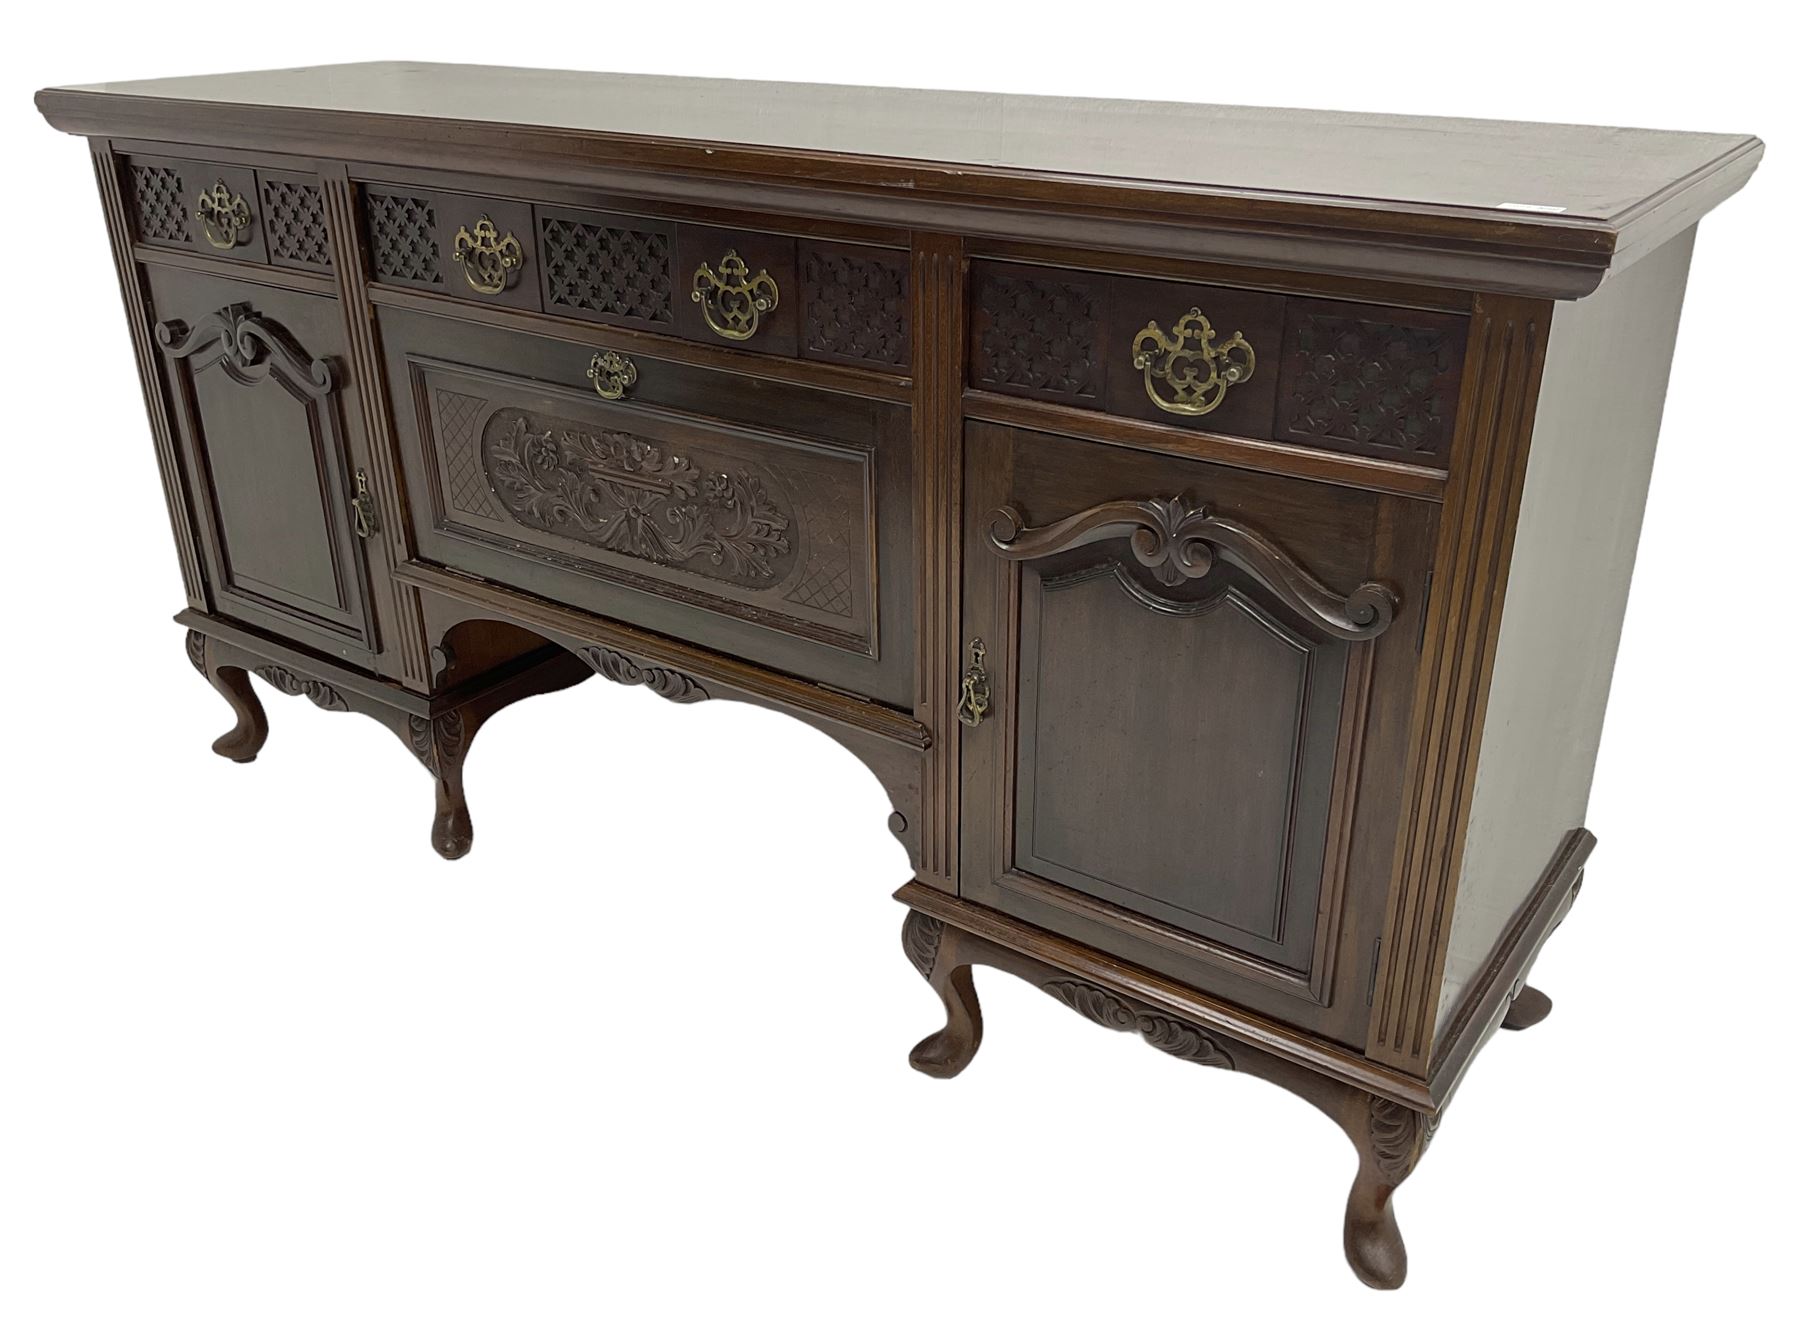 Late Victorian walnut sideboard - Image 3 of 9